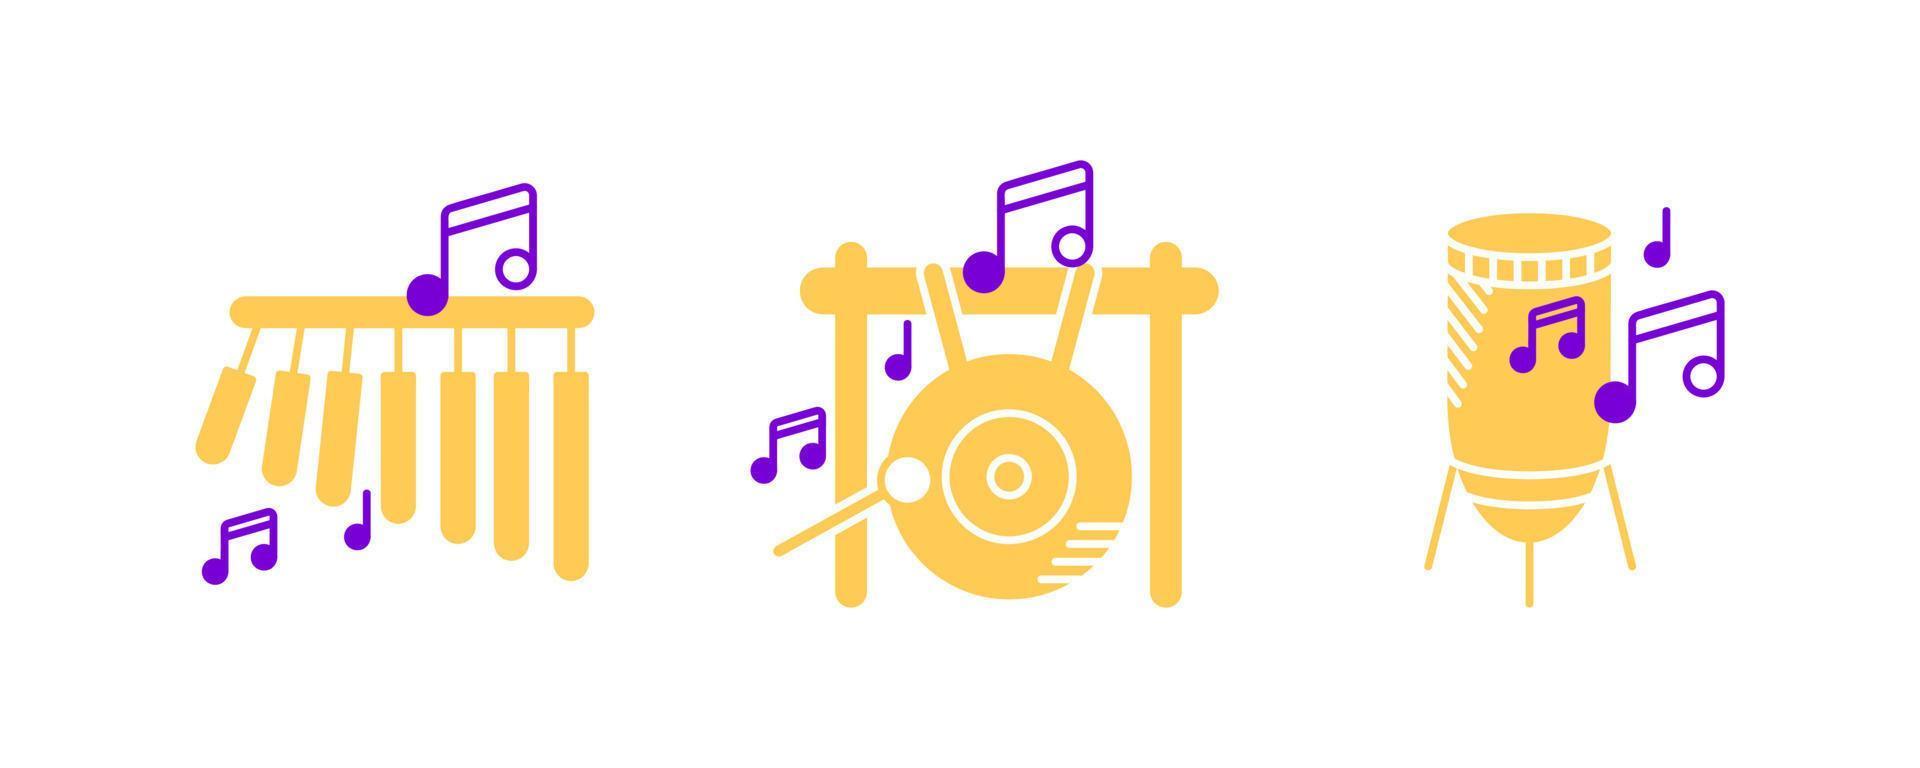 Bar chimes, Big gong, percussion and musical notes icon set. Entertainment and music icon. String instruments set. Editable row set. Colored icon set. vector